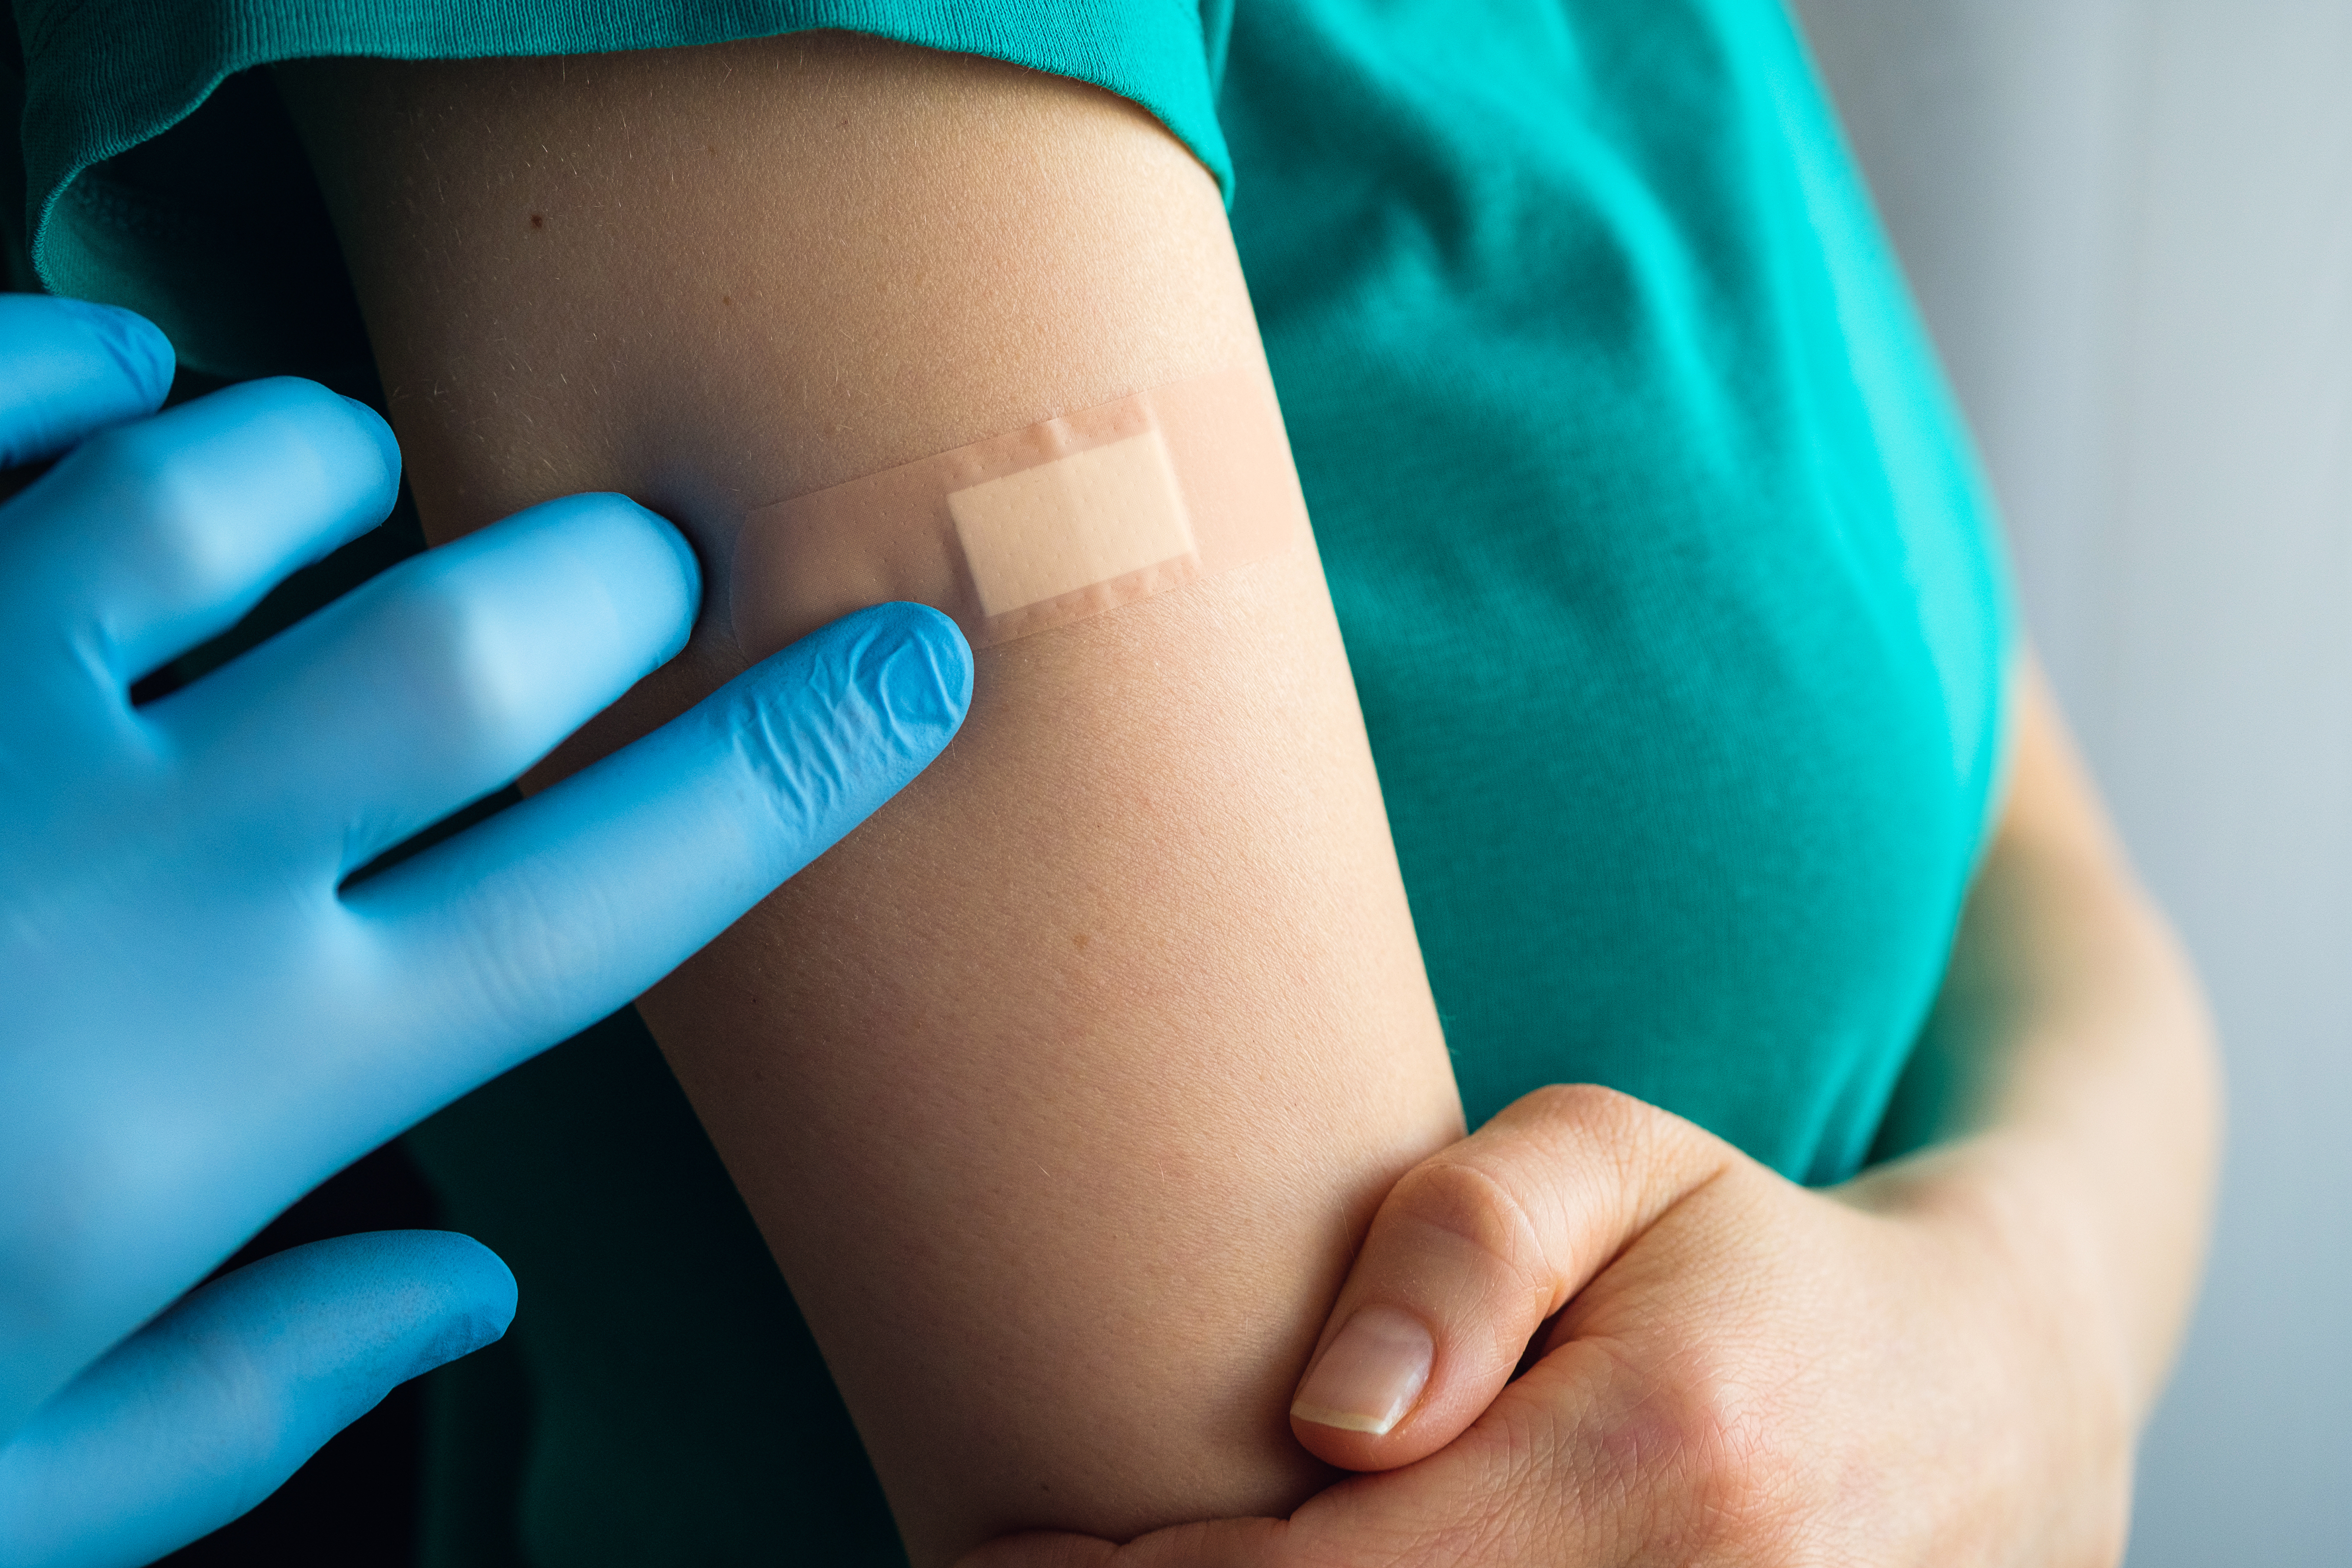 A doctor or health care professional applies a patch or adhesive